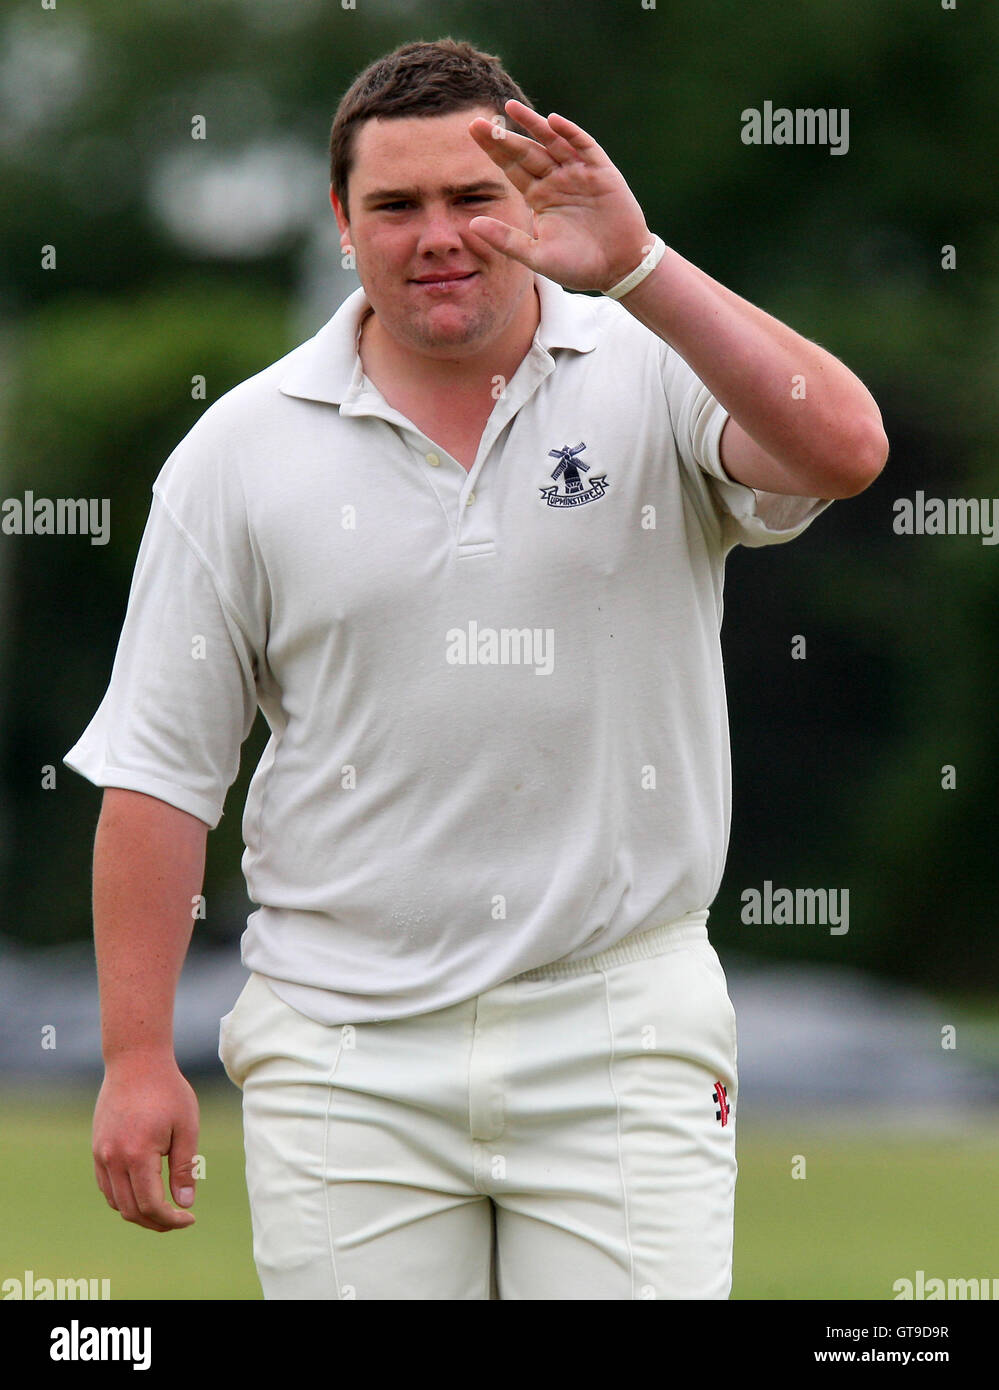 Alan Ison of Upminster - Upminster CC vs Woodford Wells CC - Essex Cricket League - 06/06/09. Stock Photo